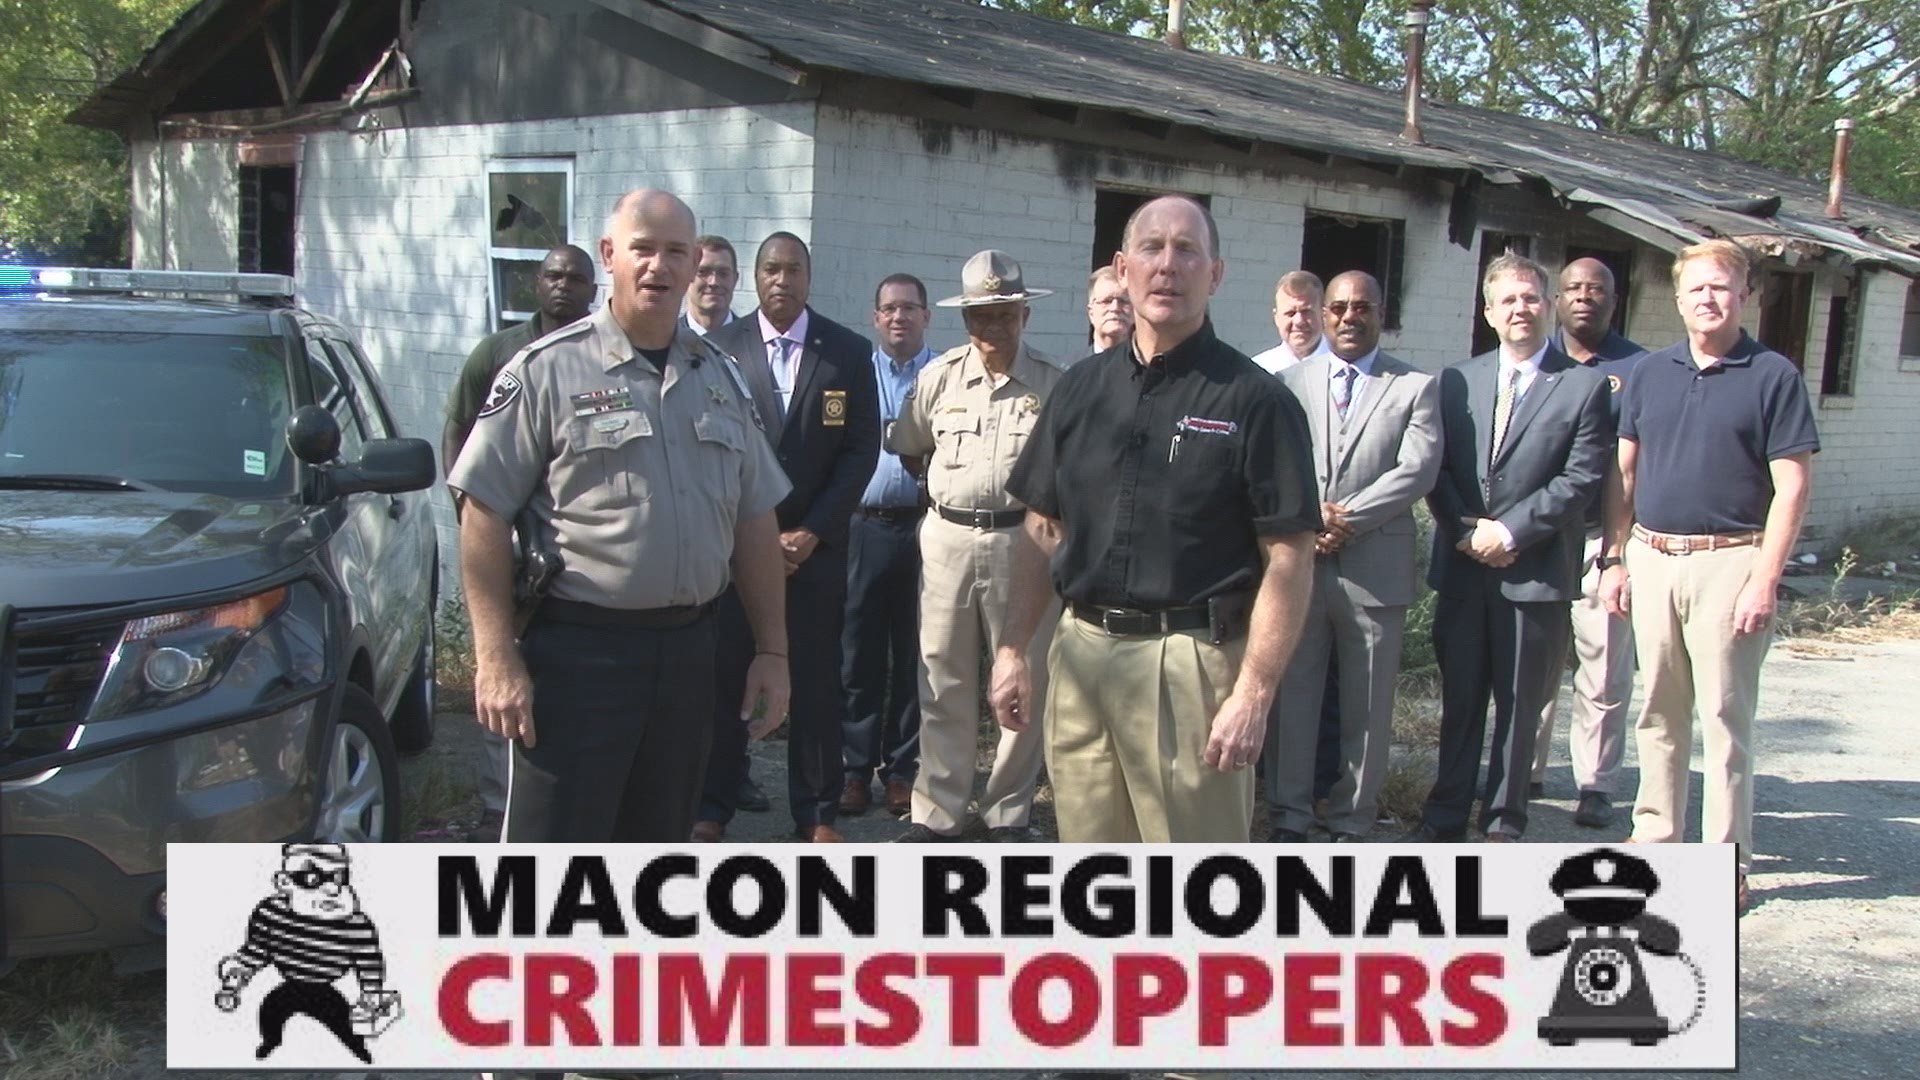 The following people are wanted by Macon Regional Crimestoppers.